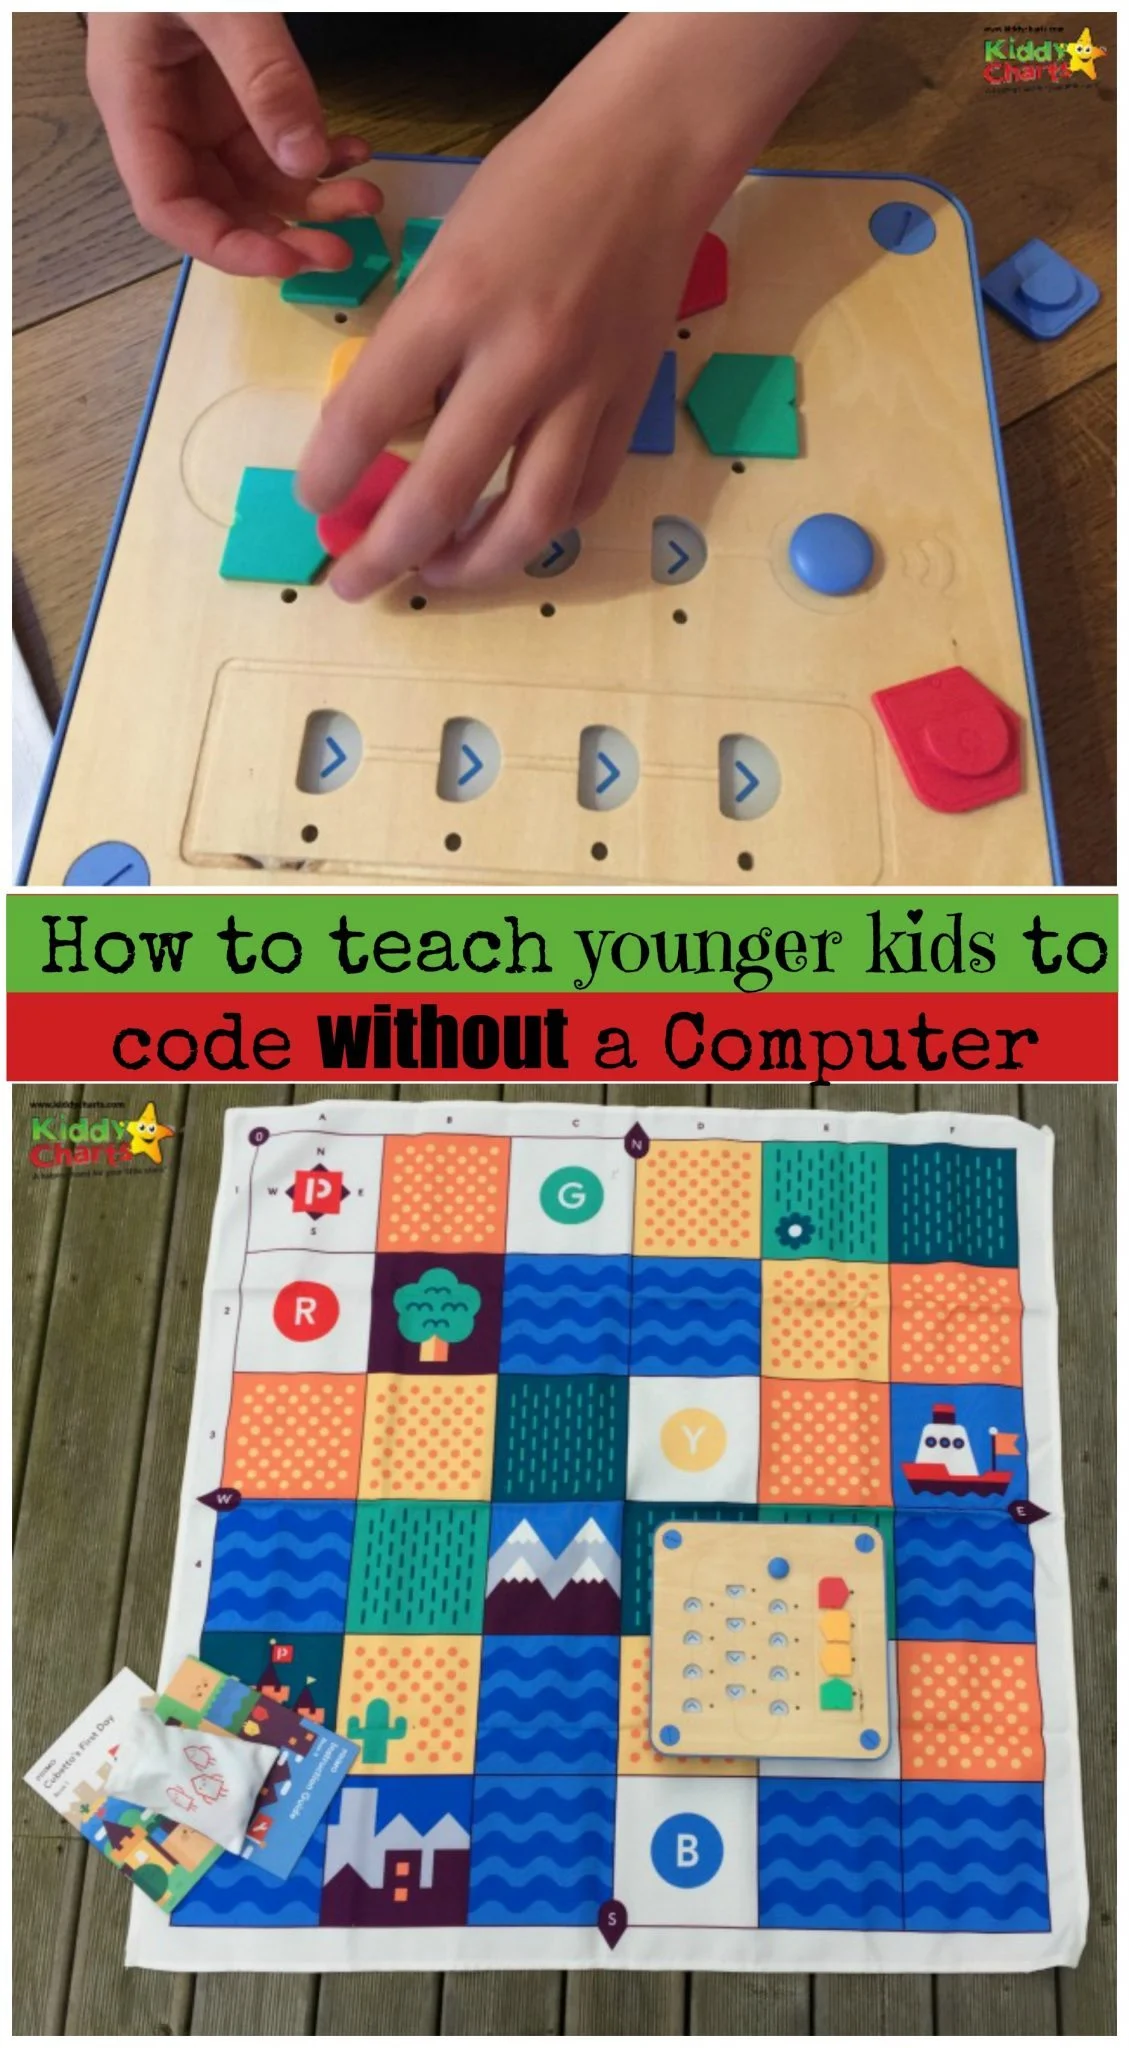 How do you teach coding to kids without a computer? THIS is how.